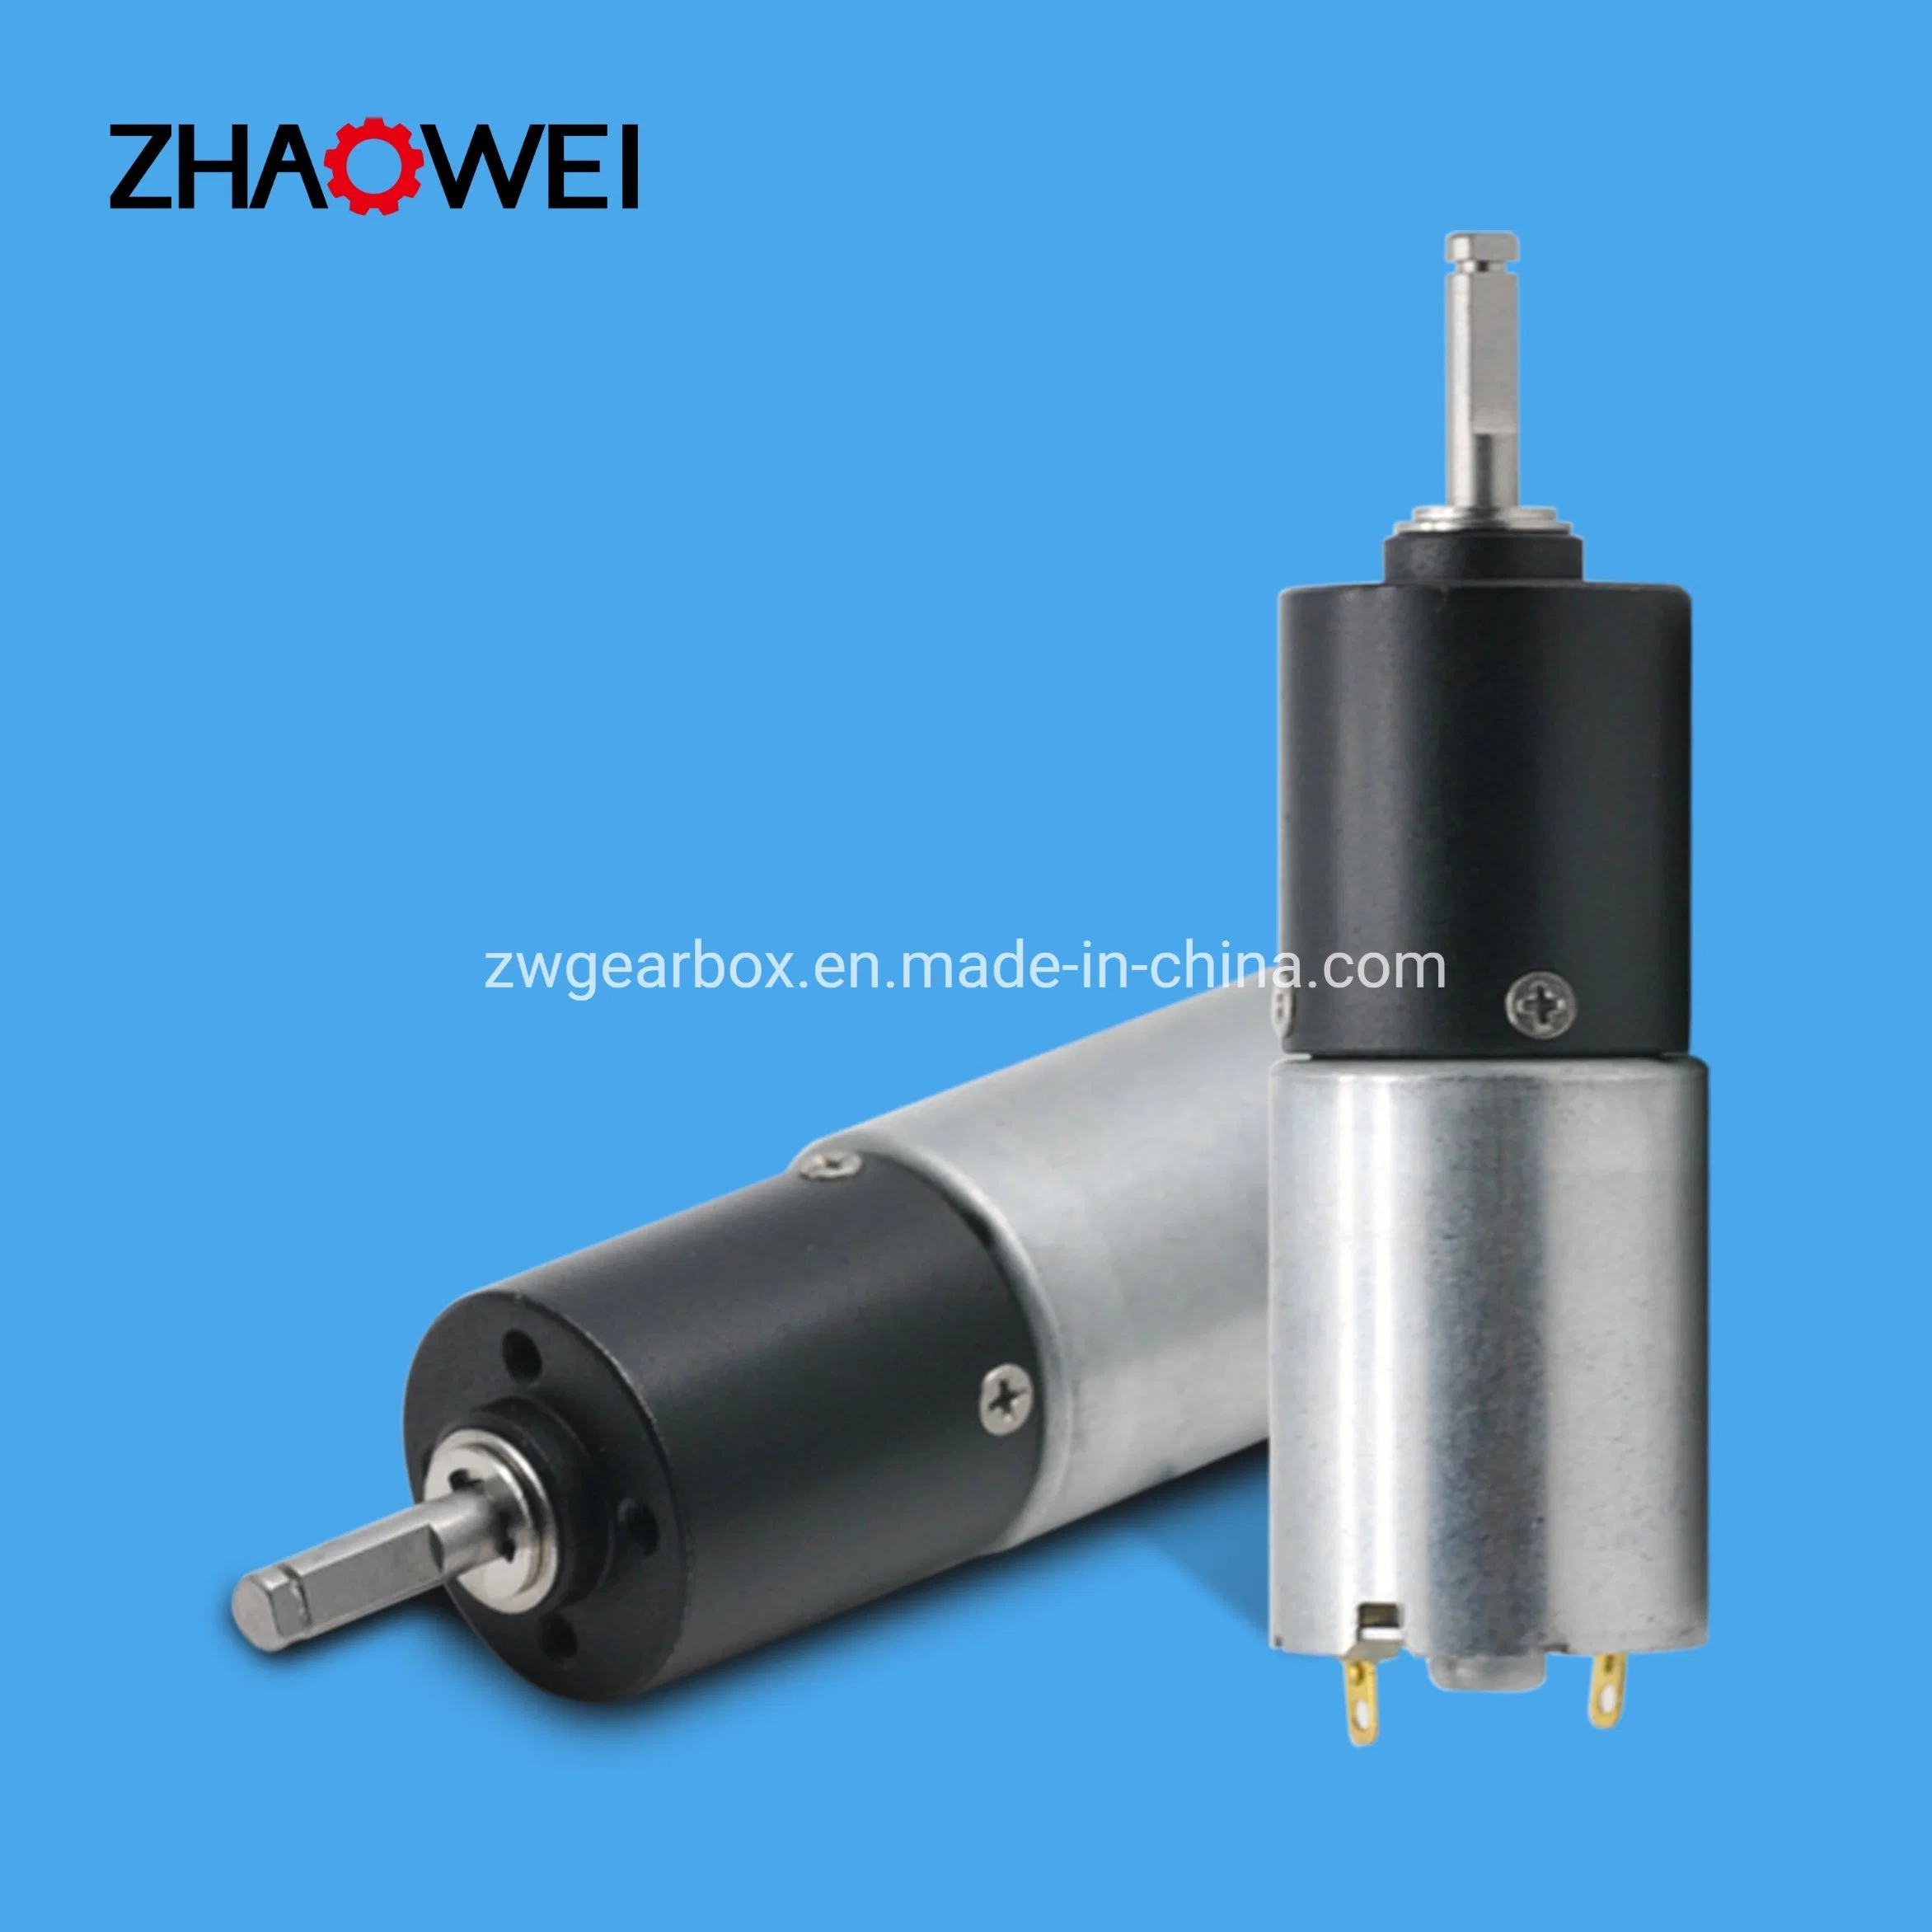 5V-25V 16mm Small Electric Reduction Motors with Gearbox